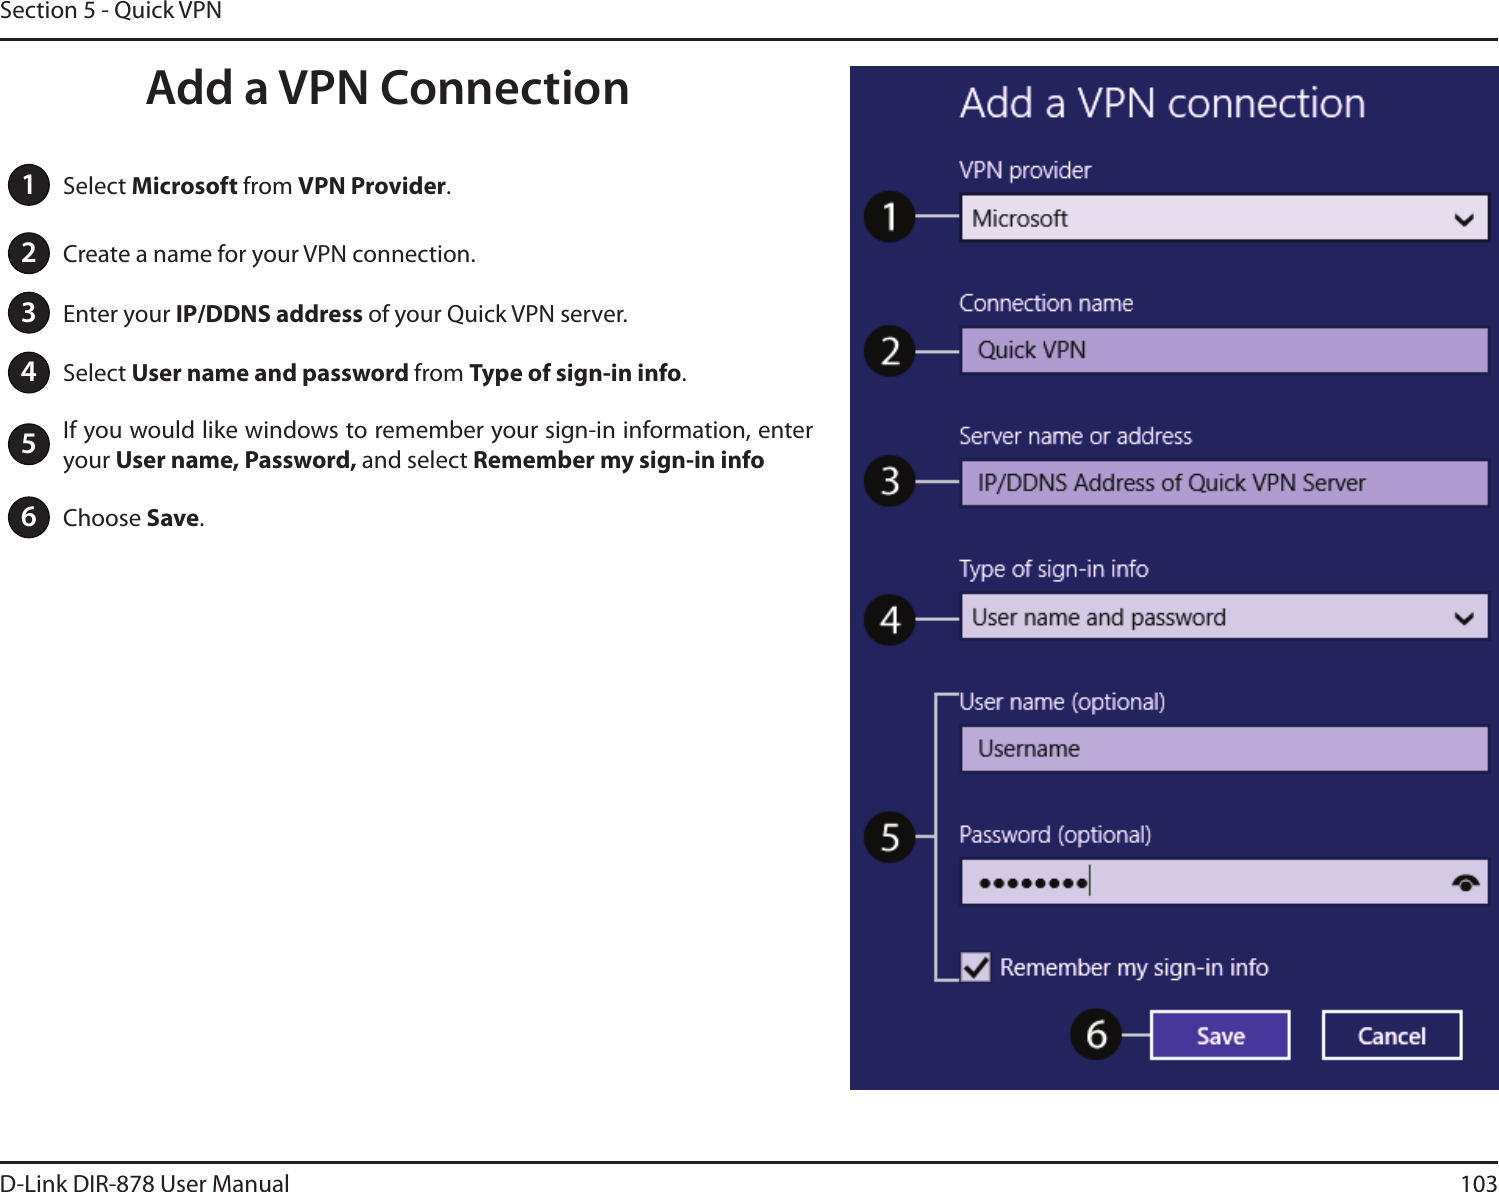 103D-Link DIR-878 User ManualSection 5 - Quick VPN1Select Microsoft from VPN Provider.2Create a name for your VPN connection.3Enter your *1%%/4BEESFTTof your Quick VPN server.4Select User name and password from Type of sign-in info.5If you would like windows to remember your sign-in information, enter your 6TFSOBNF1BTTXPSEand select Remember my sign-in info6Choose Save.Add a VPN Connection